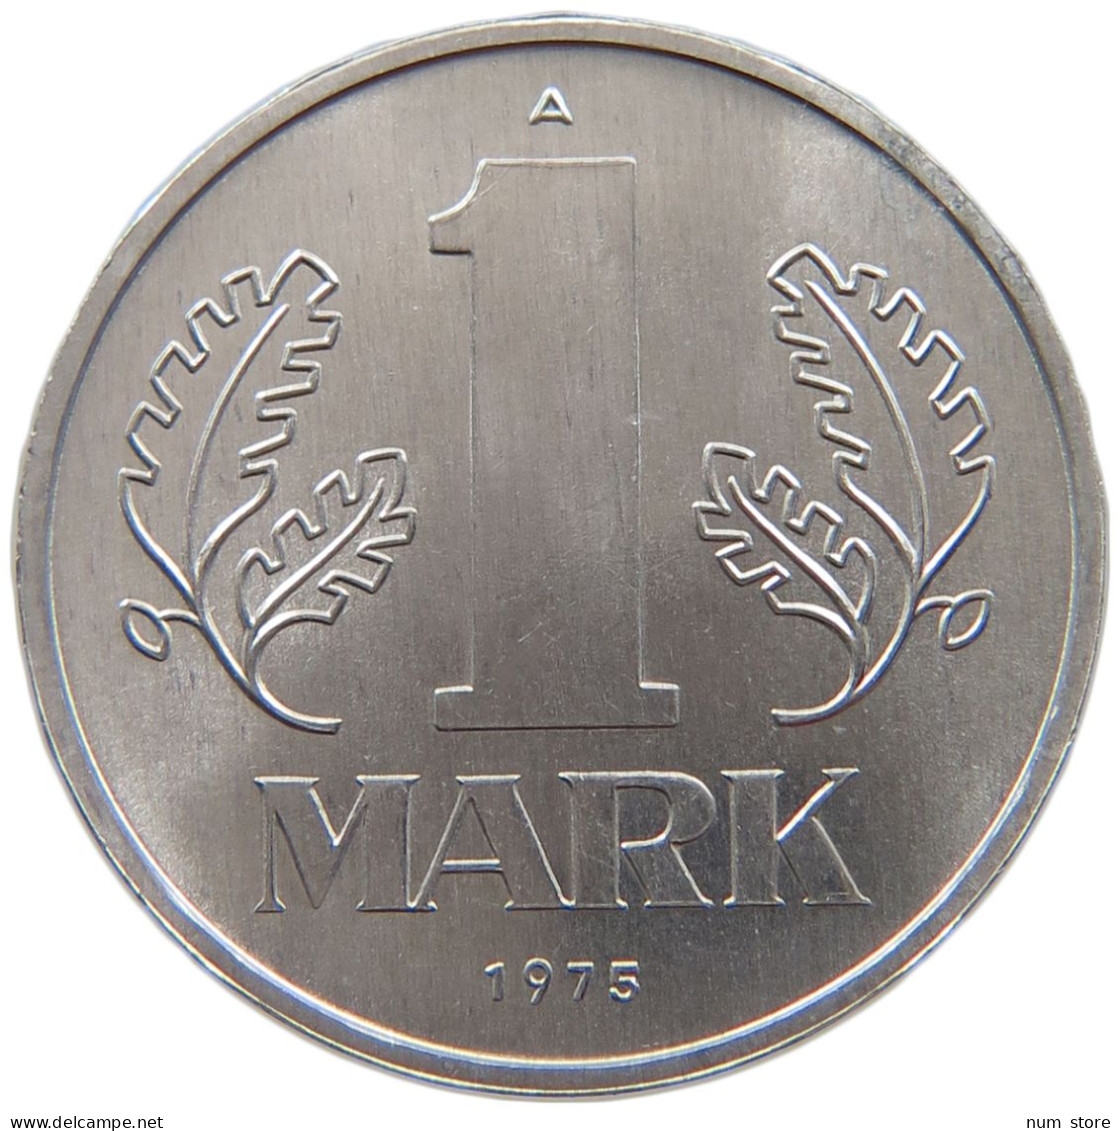 GERMANY DDR MARK 1975  #a088 0417 - 1 Marco